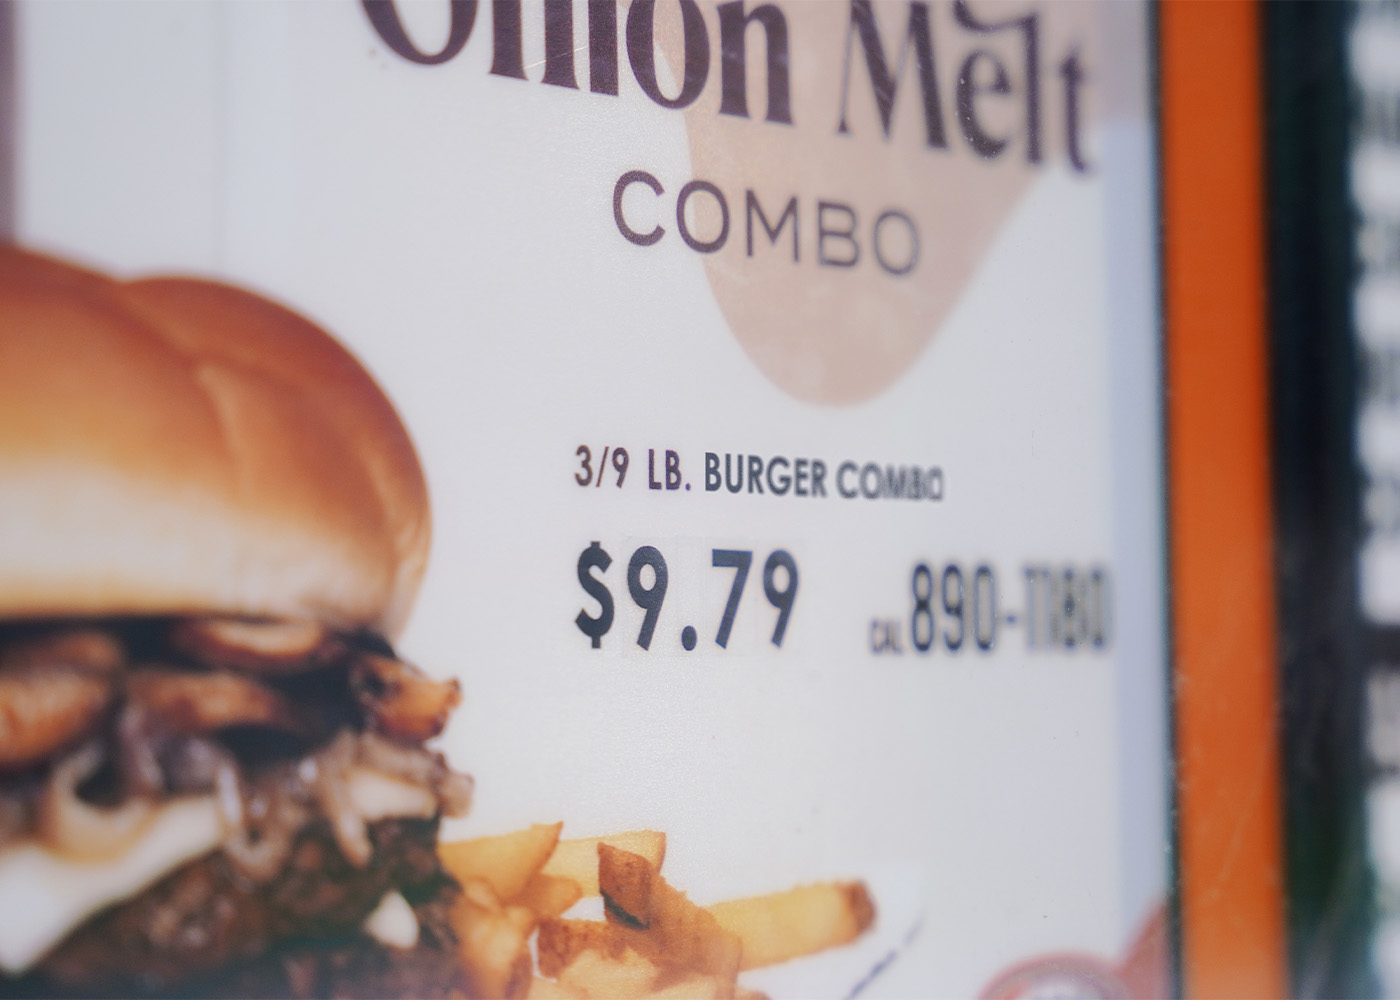 Close-up photo of a Mushroom Onion Melt Combo poster. Text on top of poster reads 